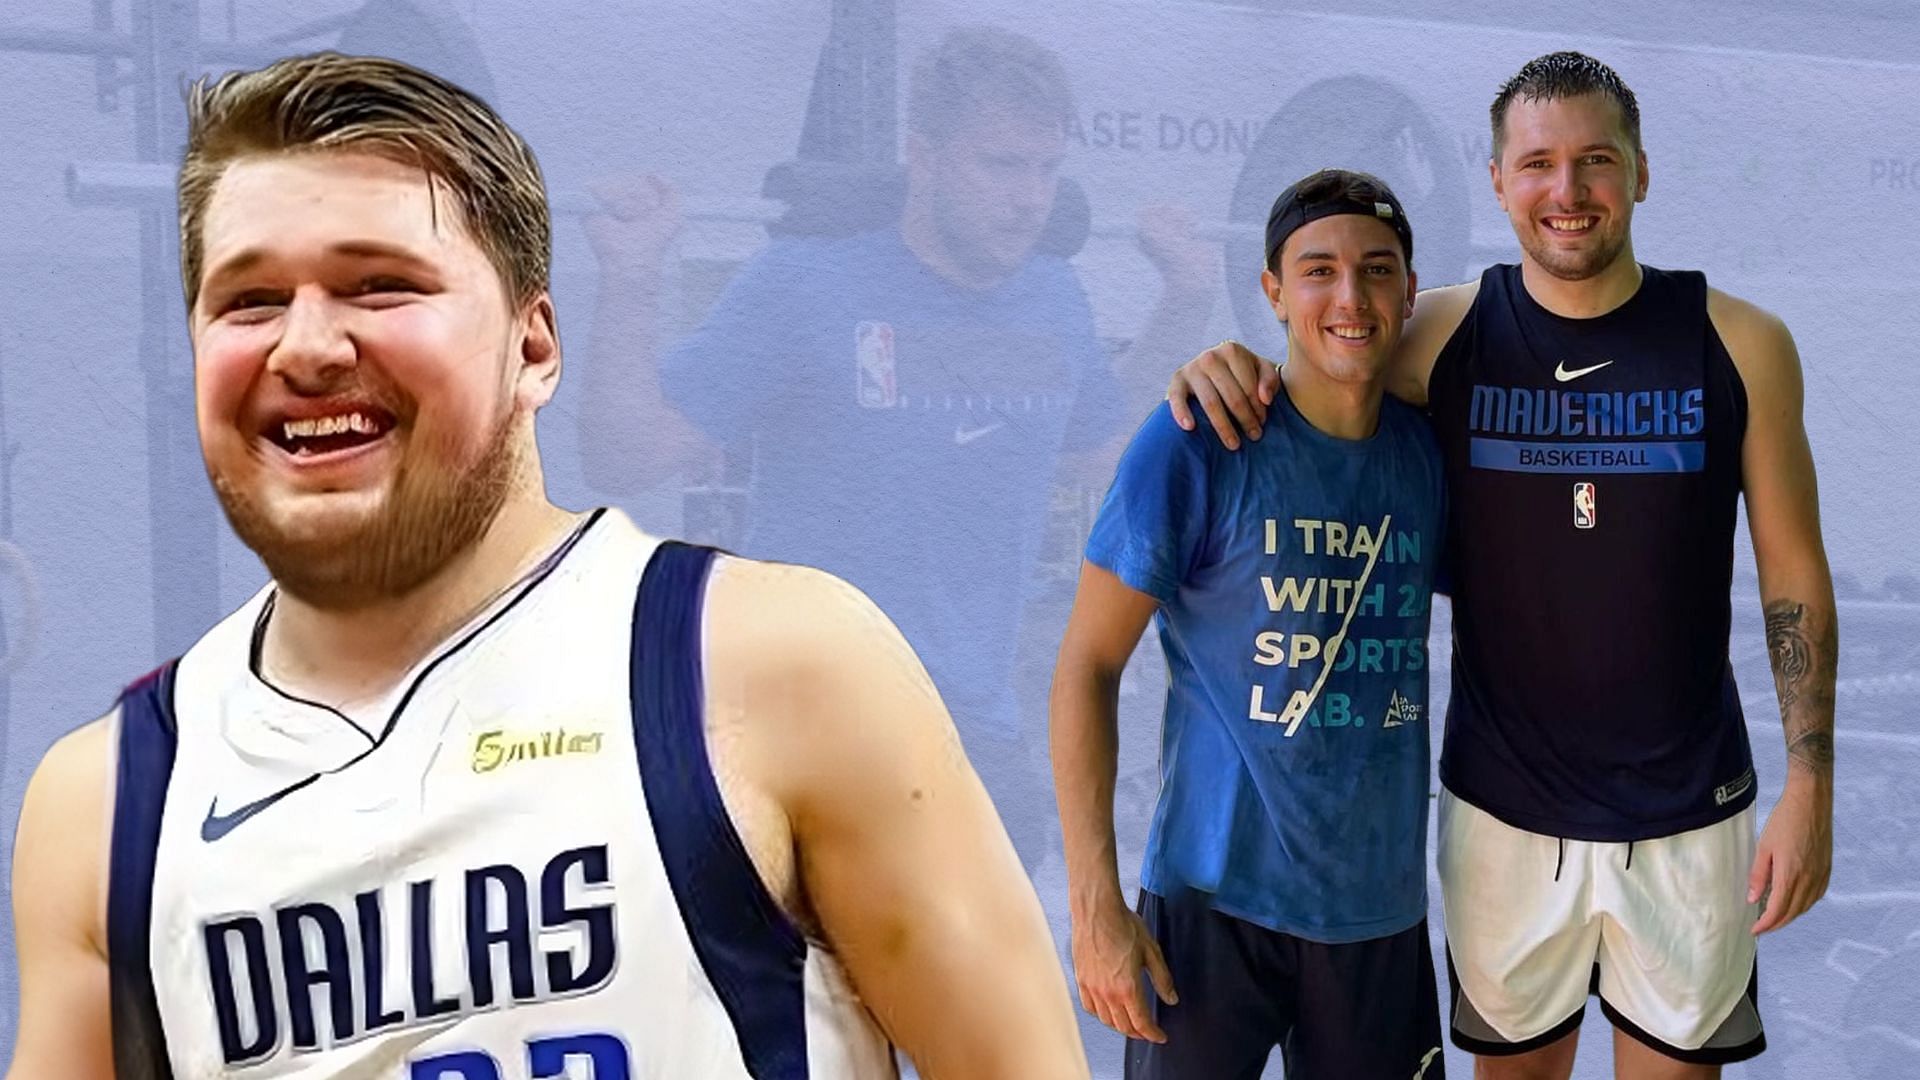 Luka Doncic shows off his fat to fit transformation at Slovenia